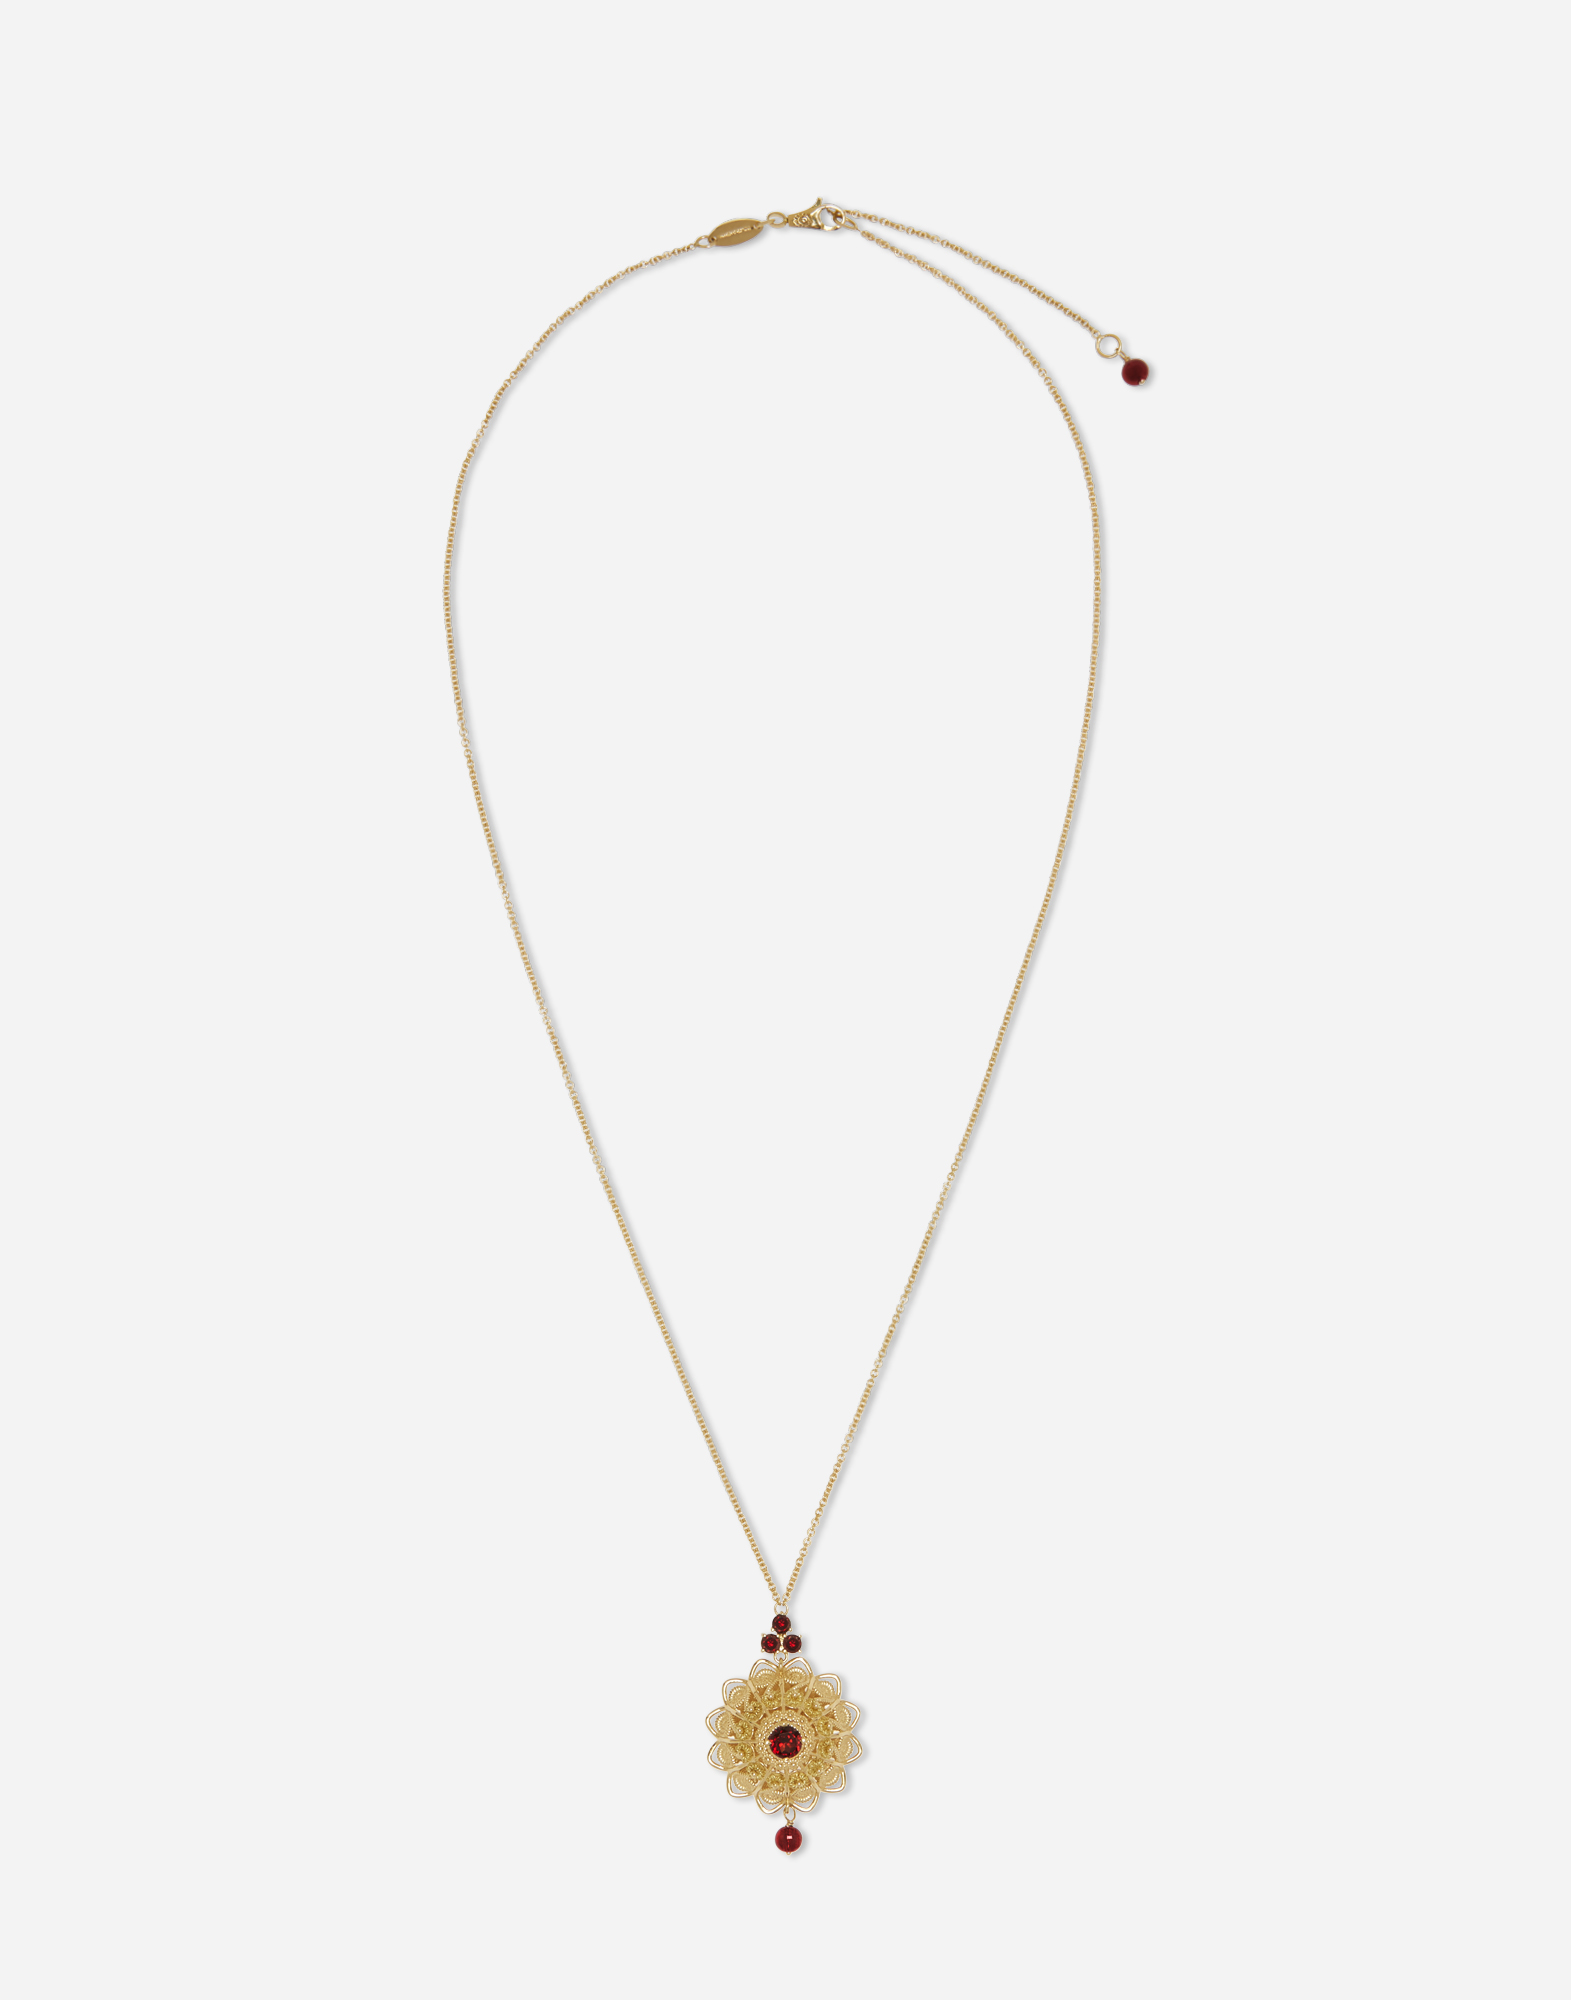 Pizzo pendant in yellow gold and rhodolite garnets in Gold